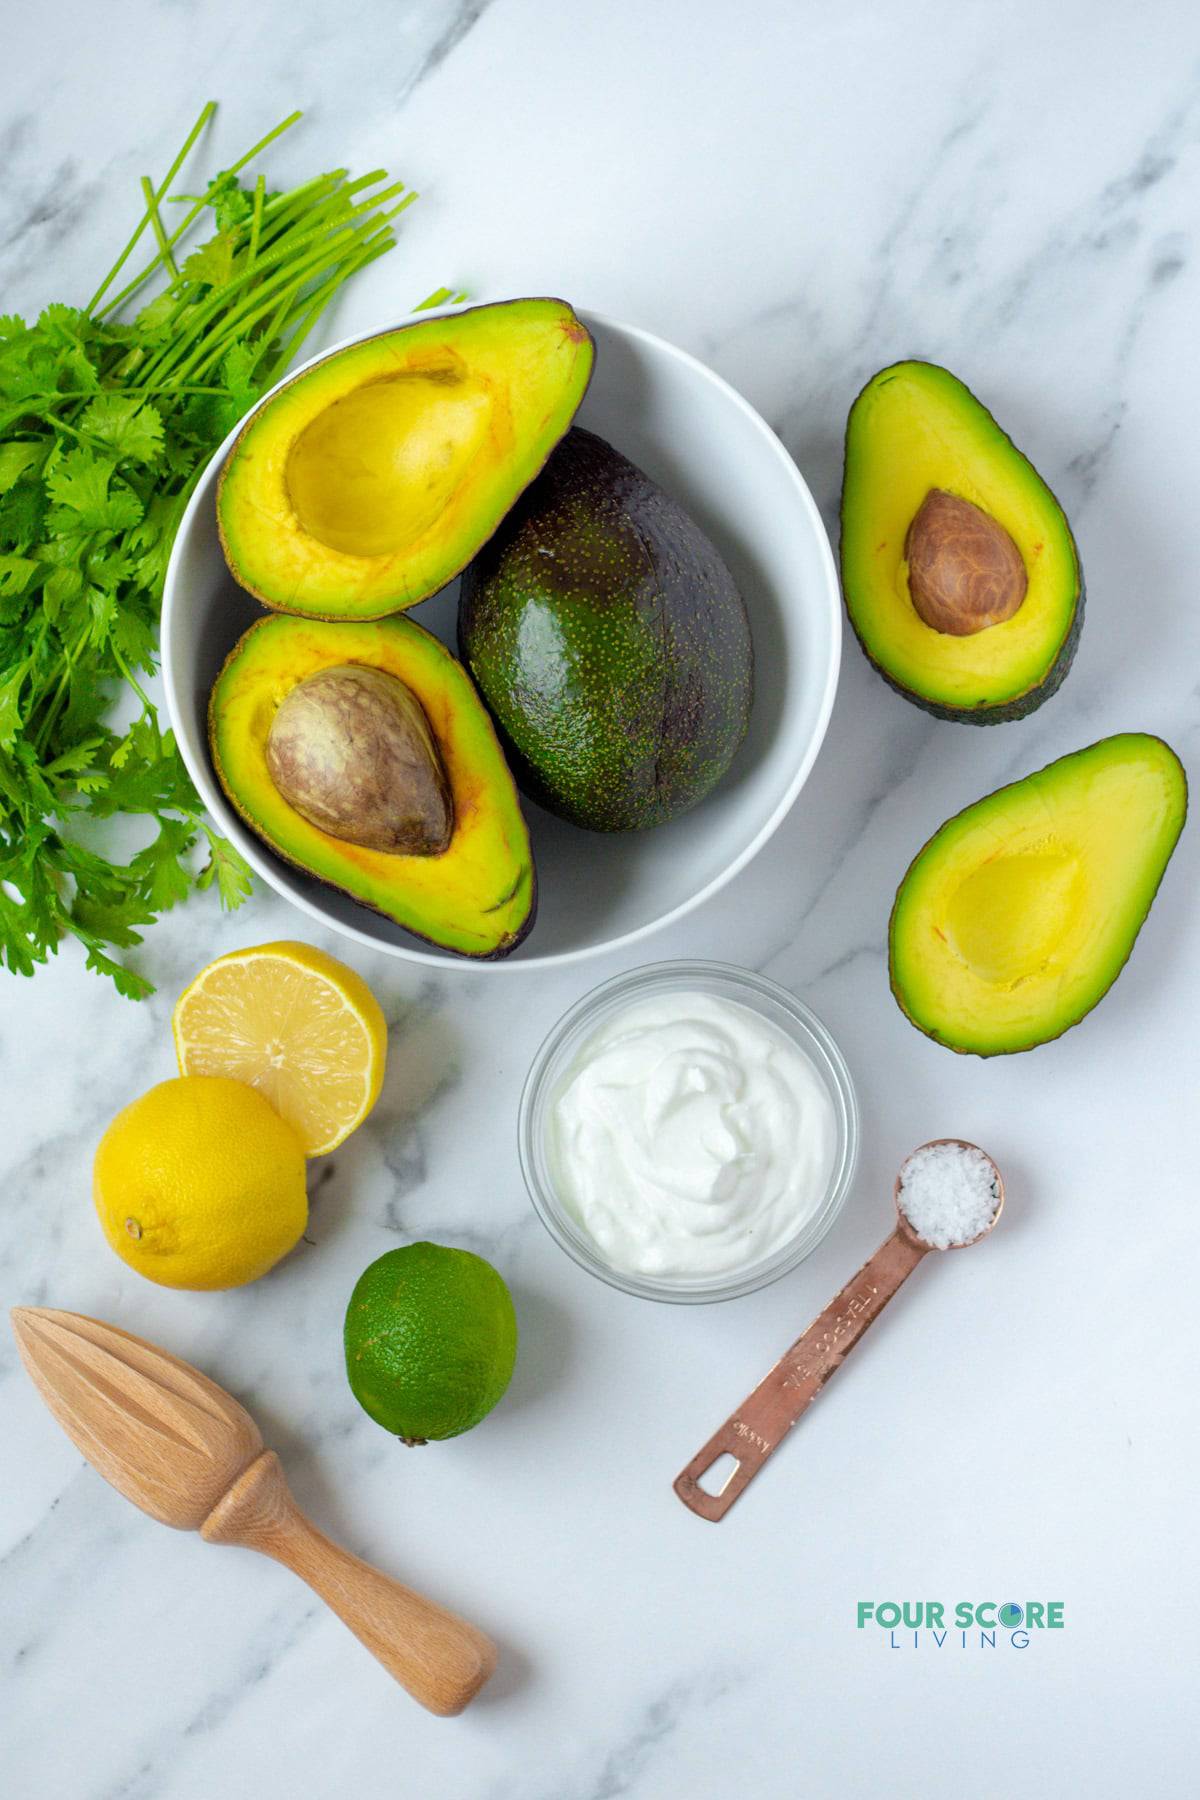 A bowl of halved avocados next to a small bowl of sour cream, a teaspoon of salt, a halved lemon, a whole lime, and a bunch of fresh cilantro